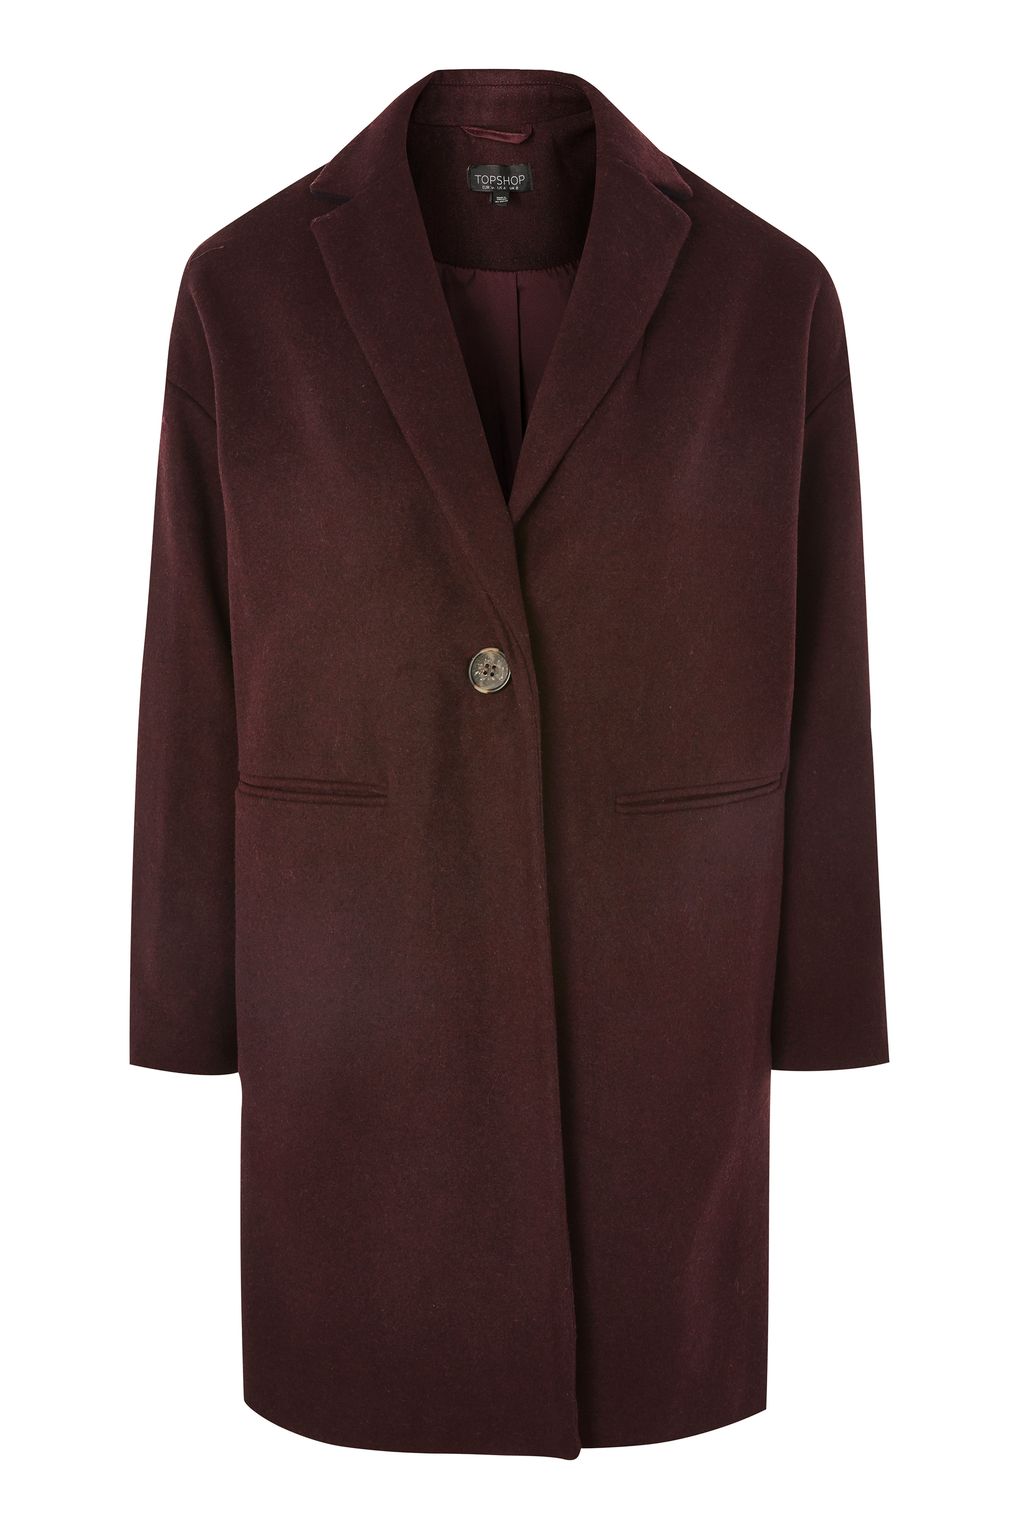 Topshop Relaxed Fit Coat